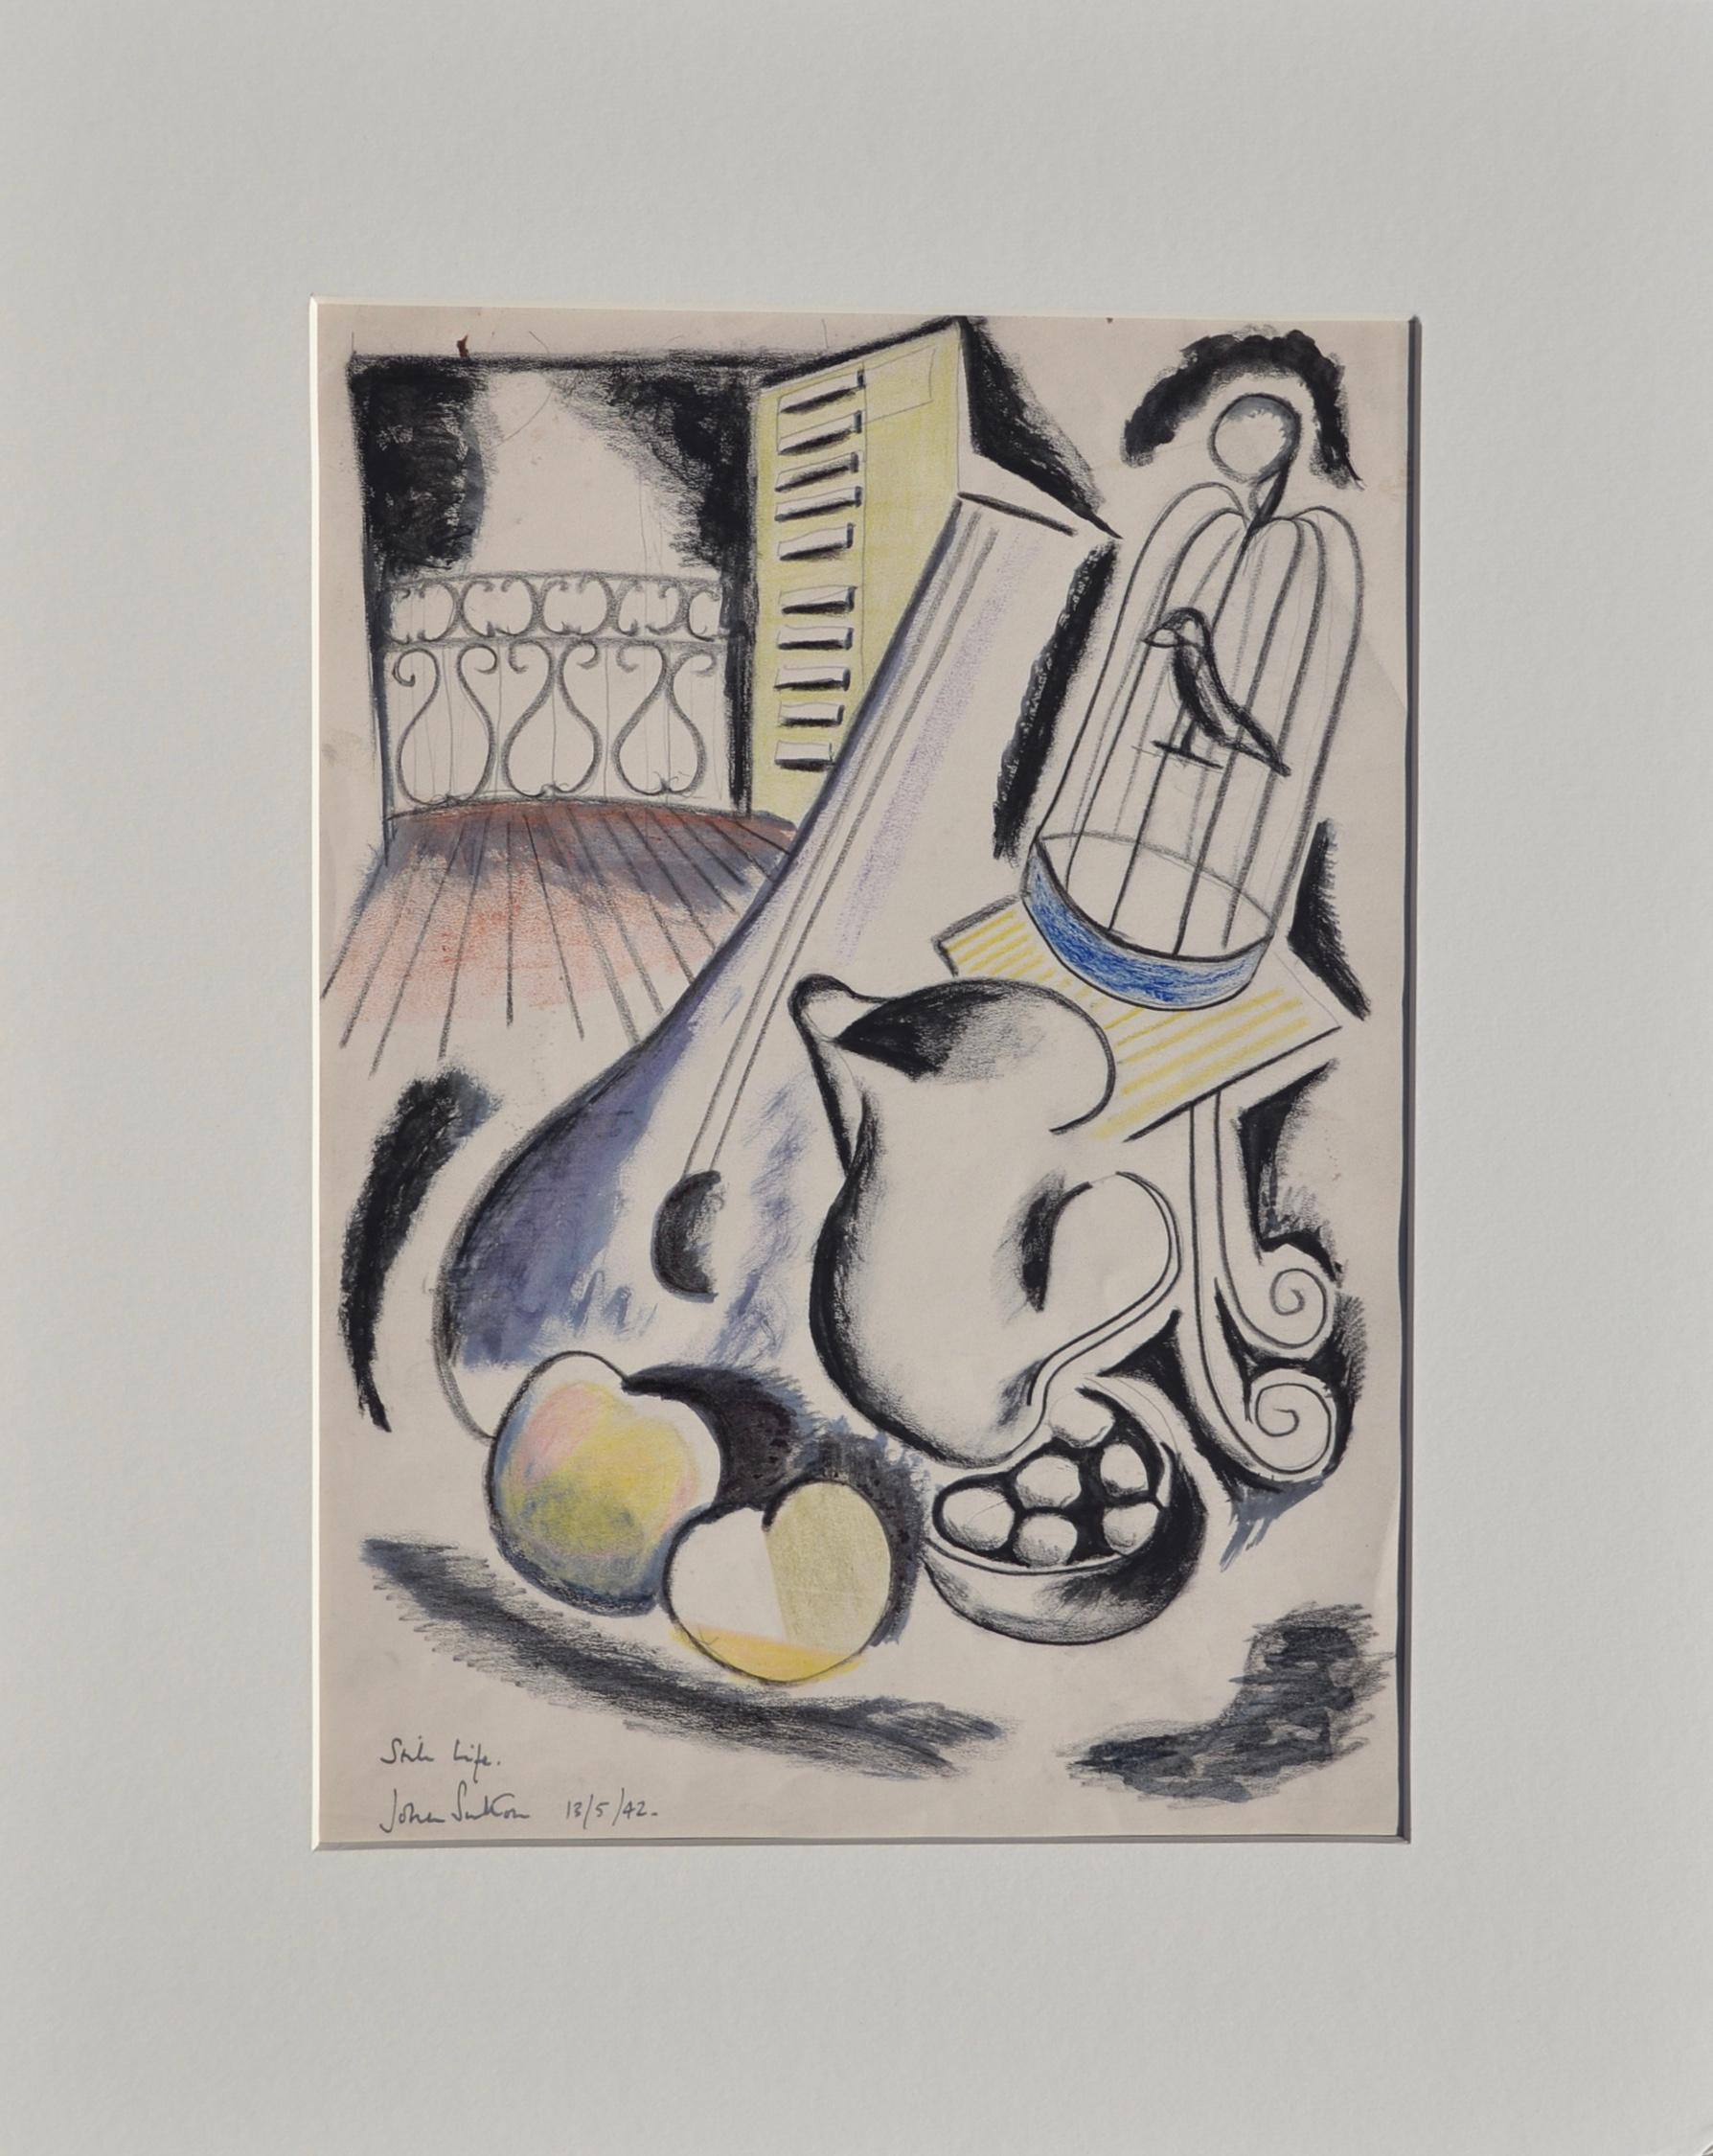 Still Life with Bird Cage - 1940s Cubist Still Life Drawing - Art by John Sutton